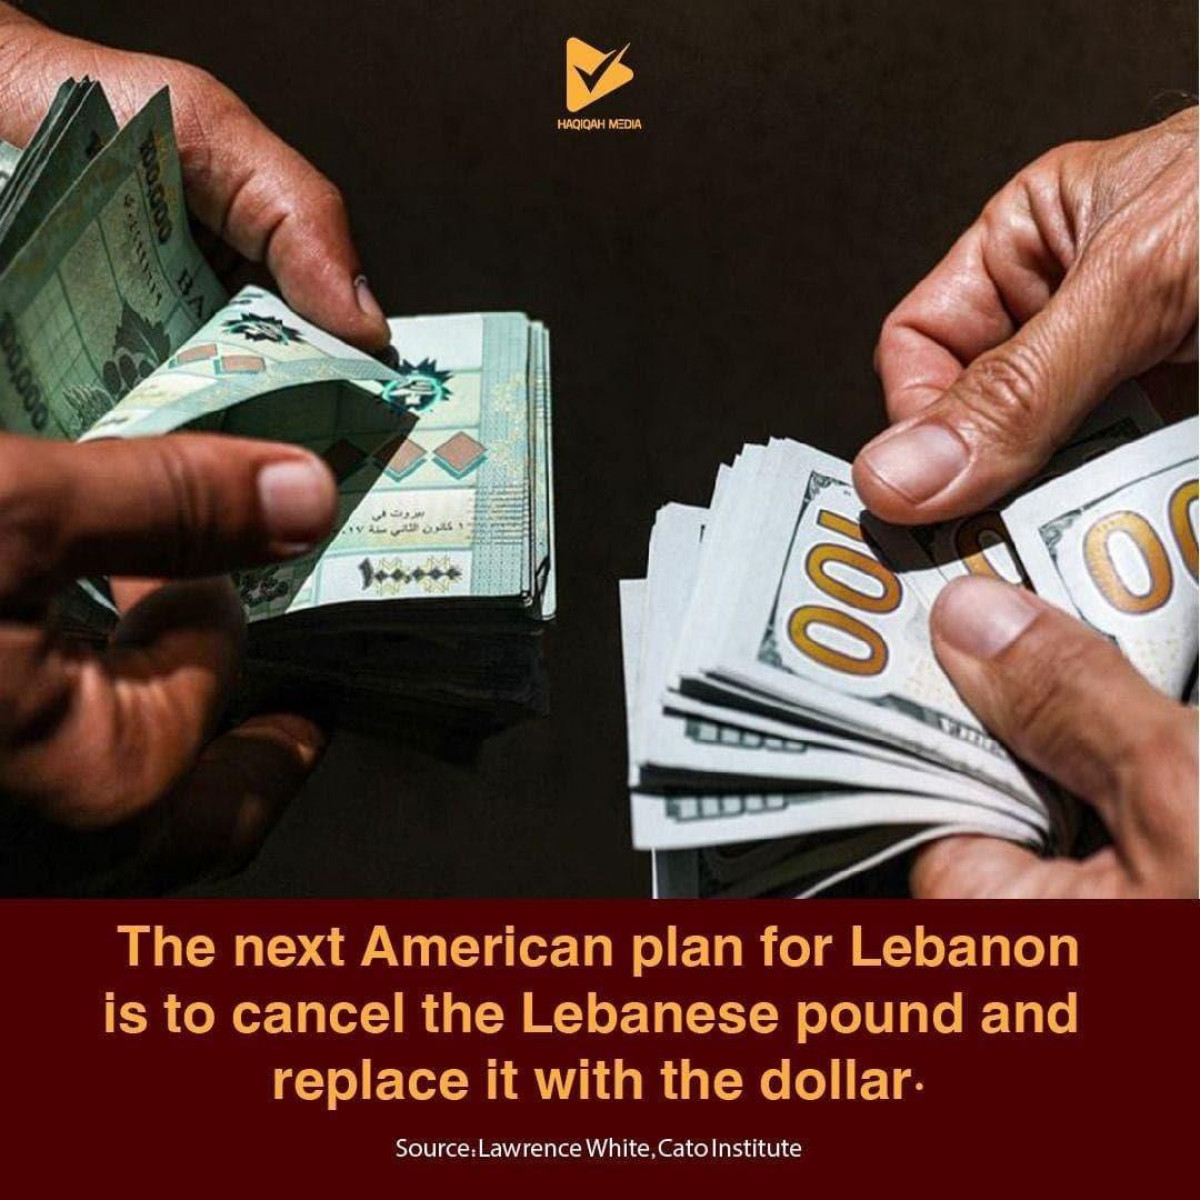 The next American plan for Lebanon is to cancel the Lebanese pound and replace it with the dollar